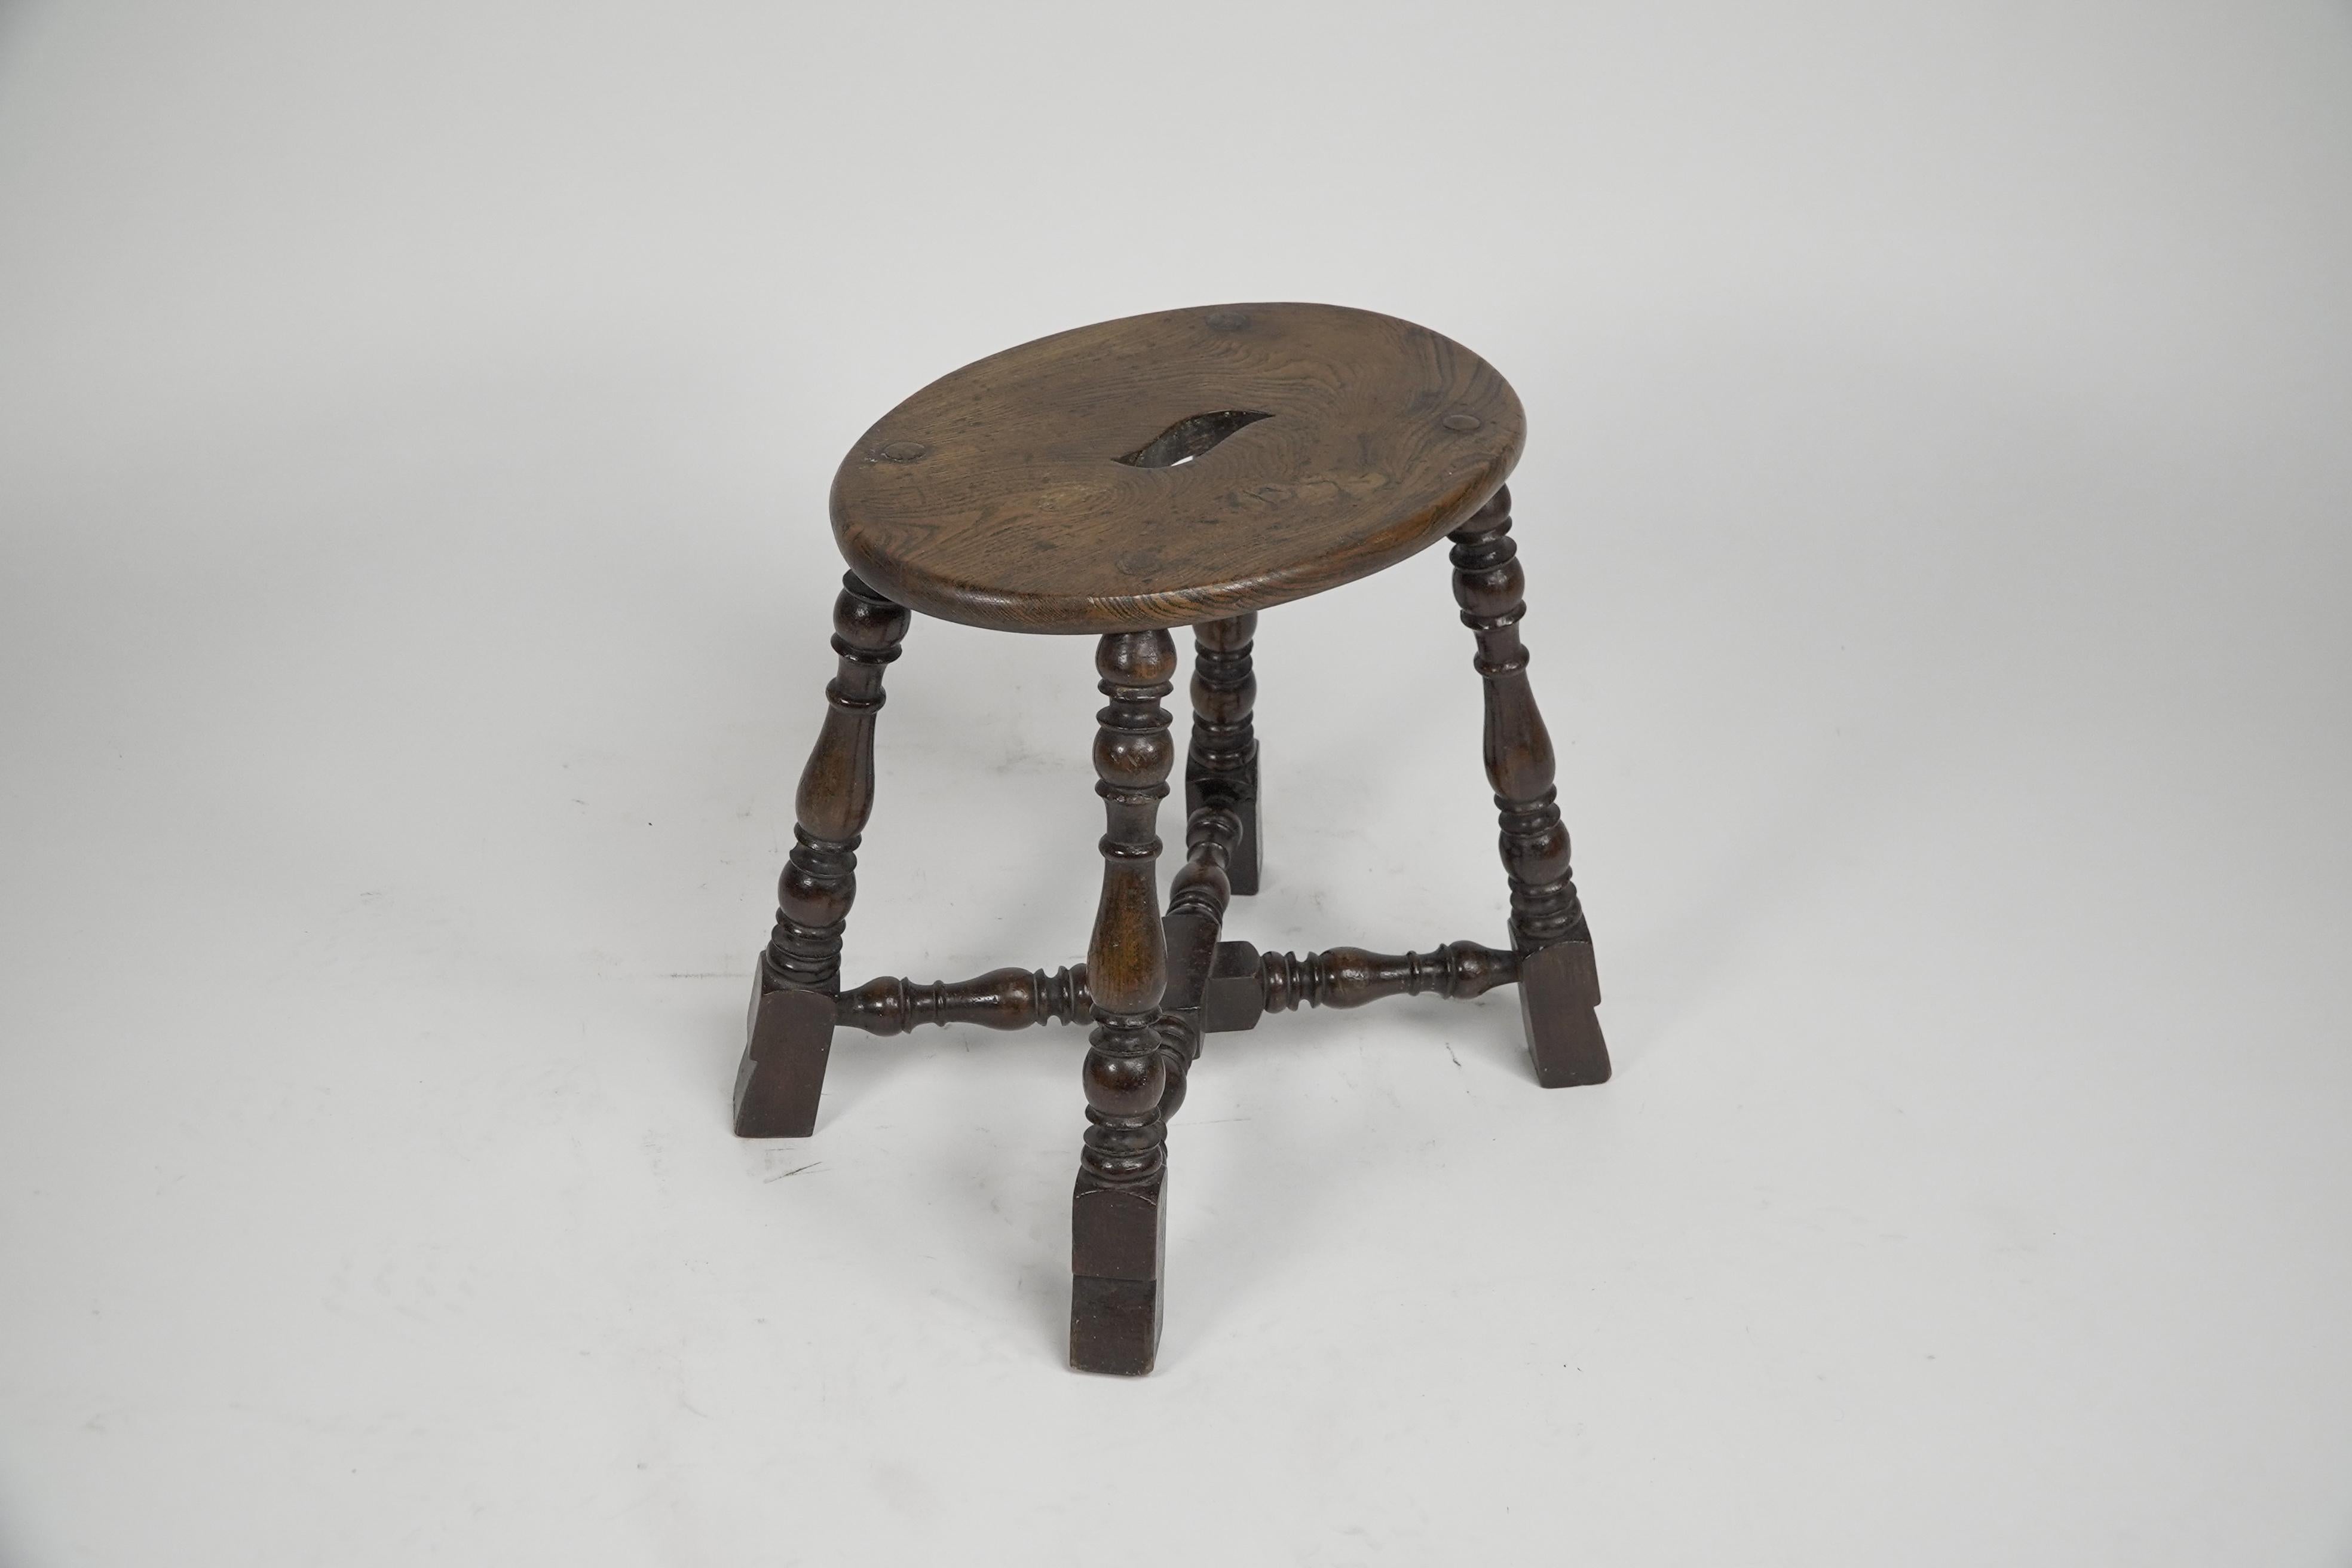 Late 19th Century An Aesthetic Movement Elm stool with a 'S' handle, and a wild grain to the seat. For Sale